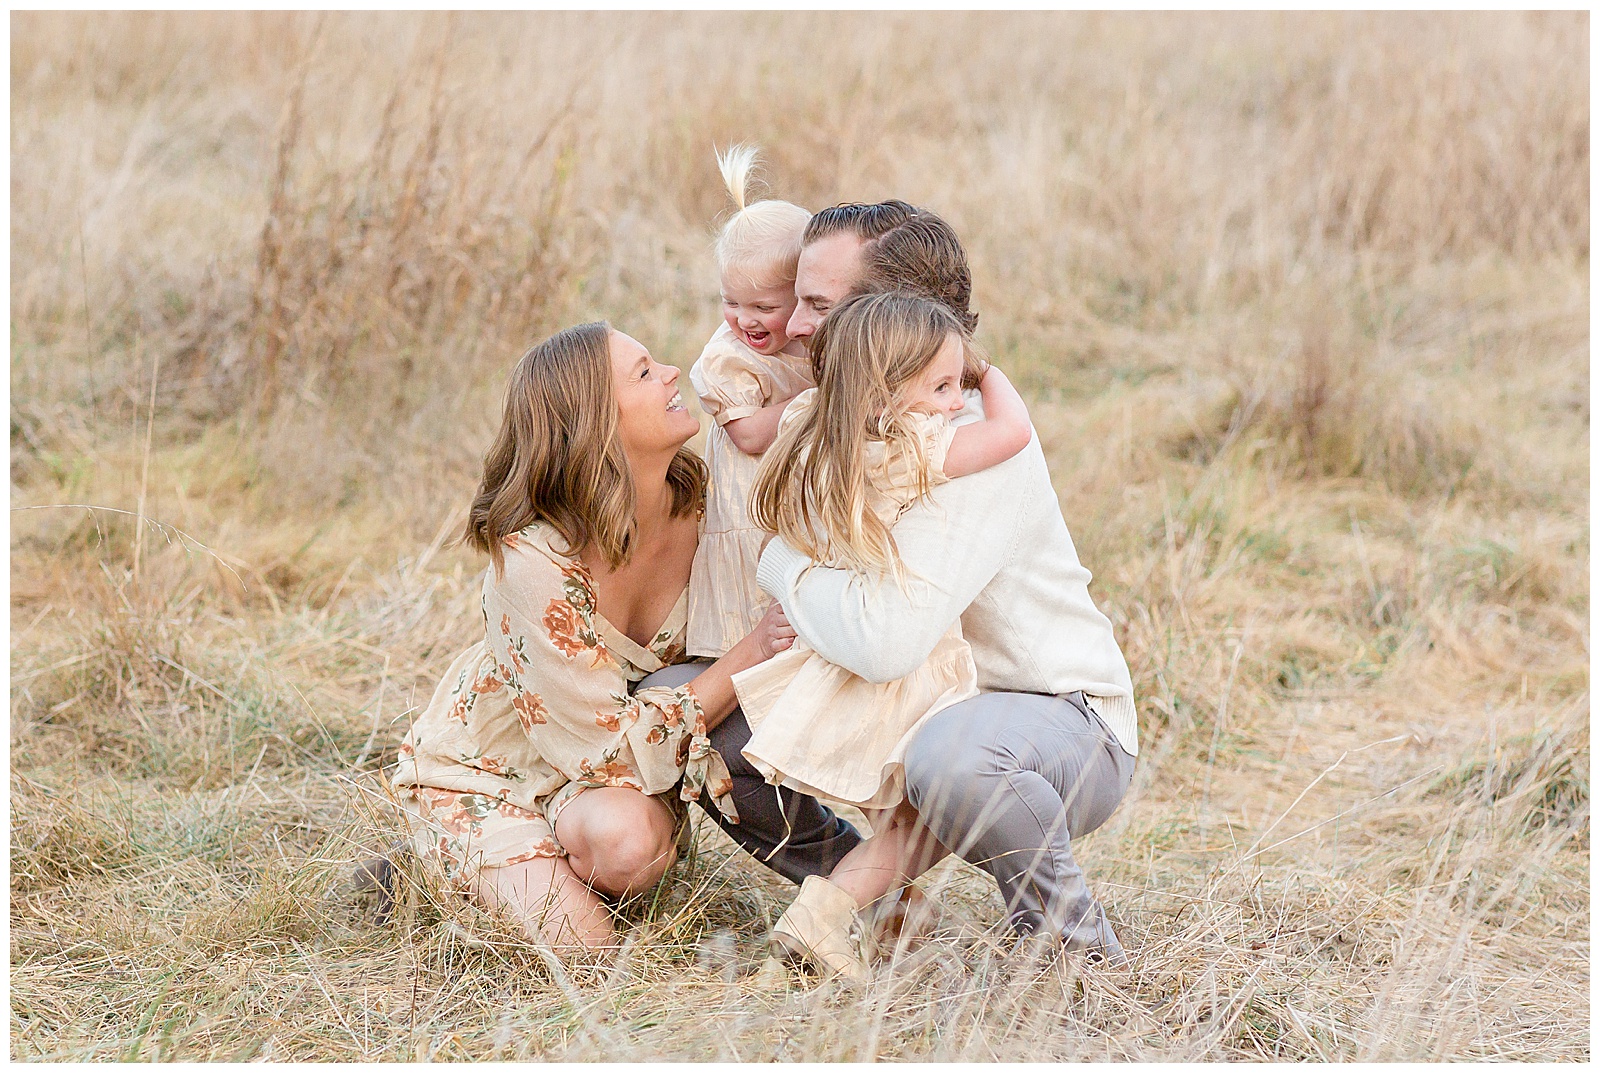 Nashville family photographer, Rebecca Rice, captures family of 4 in a Nashville field for her Behind the Lens membership.  Mom and Dad squat low as they share a big family hug and smile and laugh together!